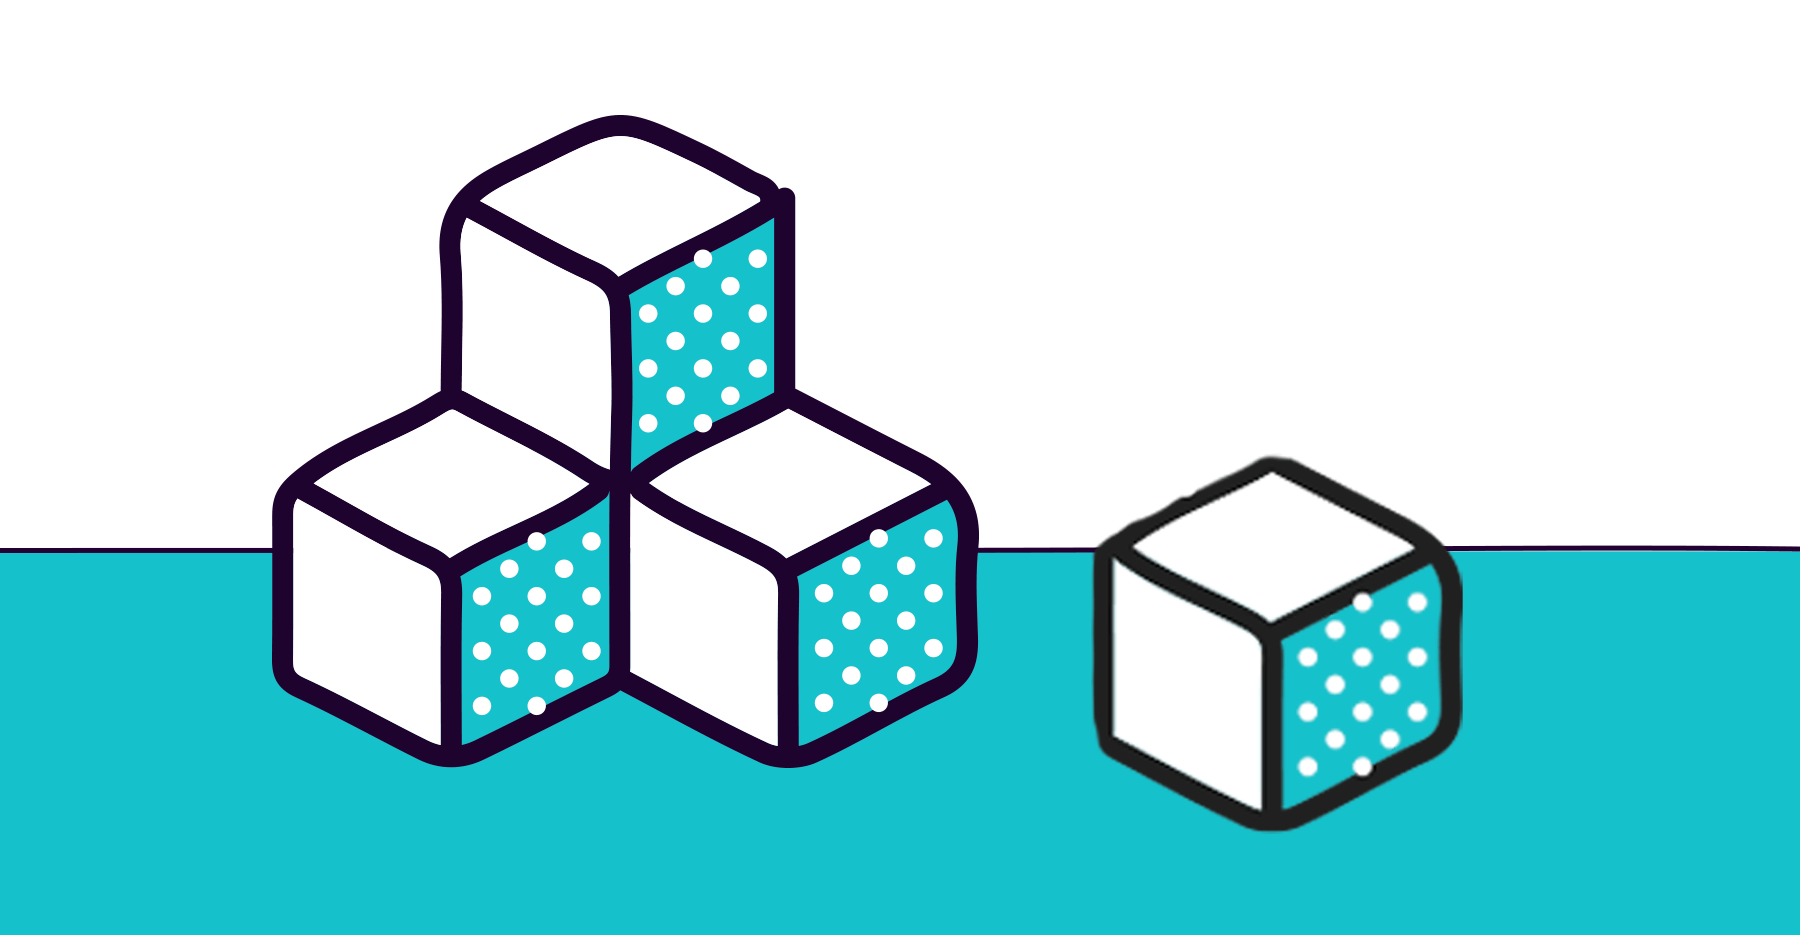 An illustration of some sugar cubes on a blue background